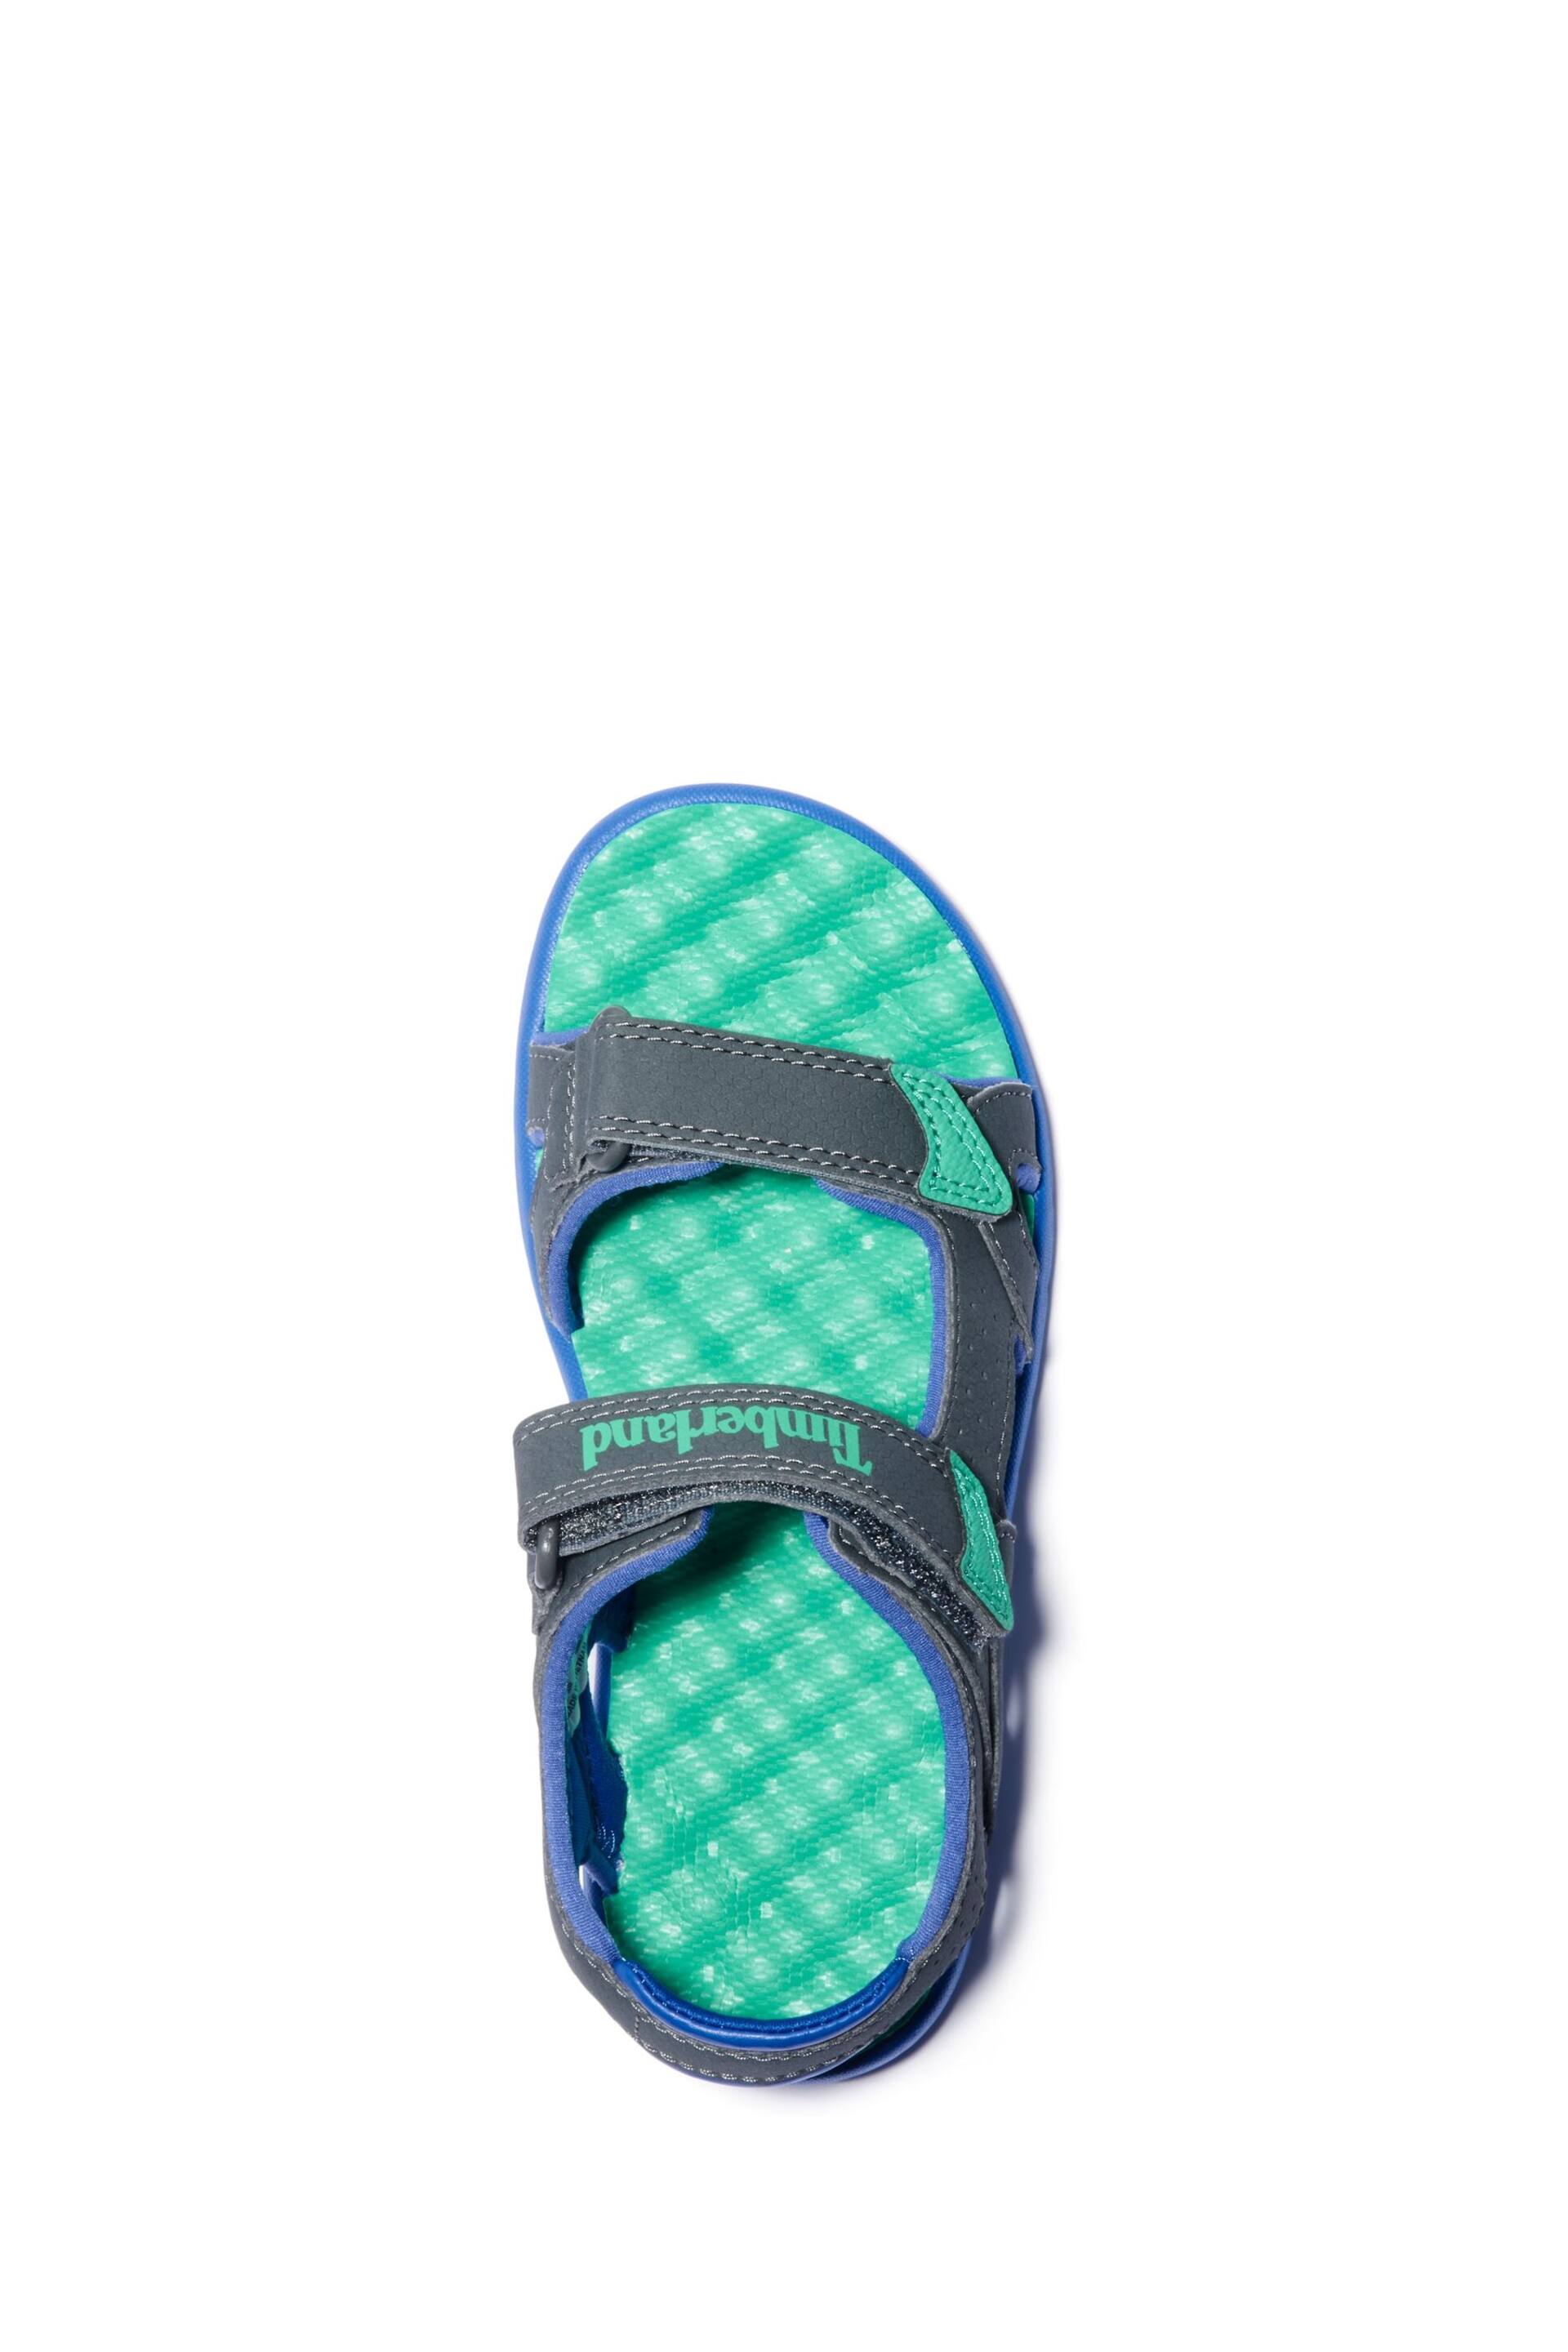 Timberland Perkins Row Blue Sandals - Image 3 of 4